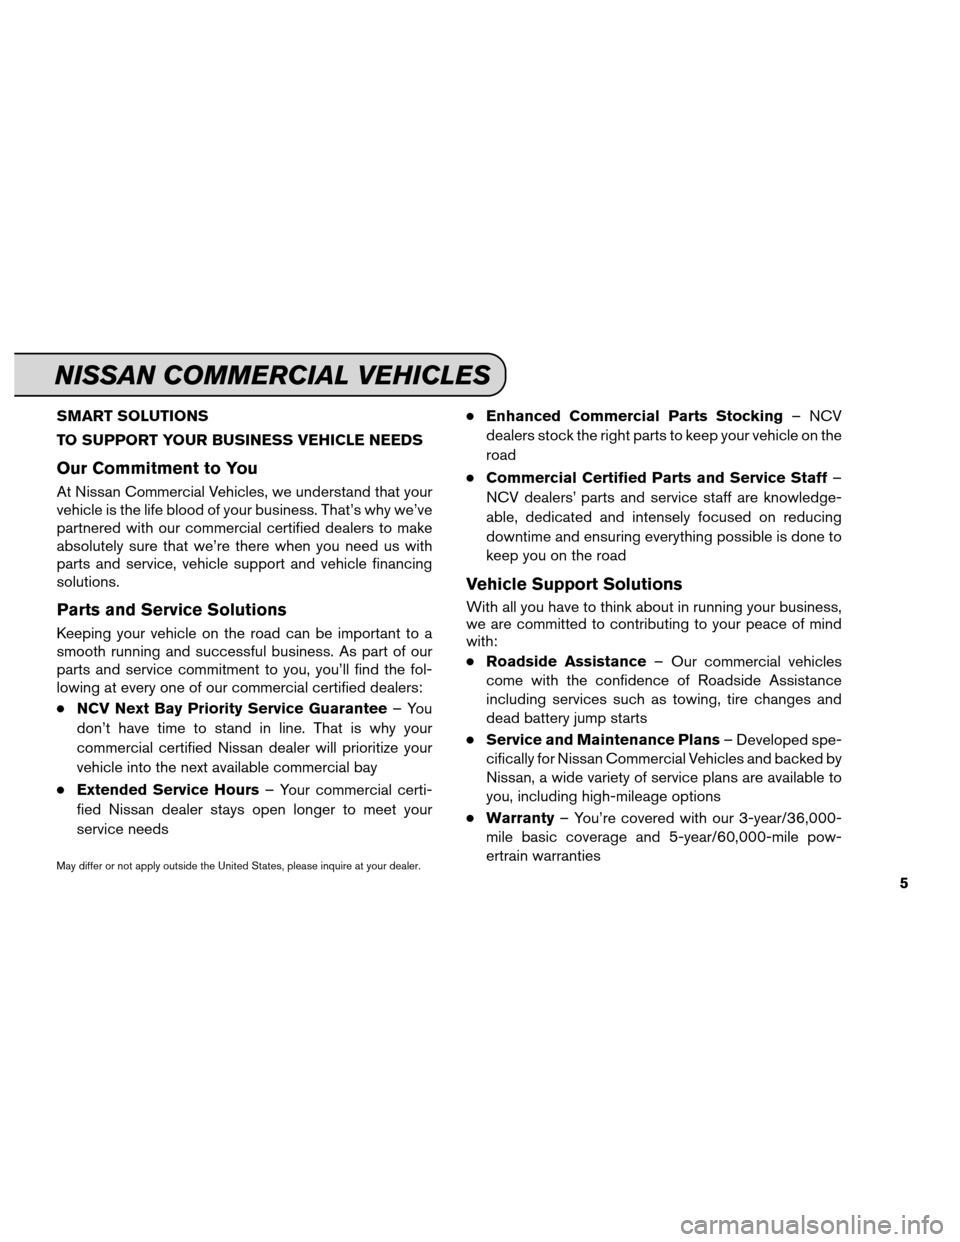 NISSAN SENTRA 2013 B17 / 7.G Service And Maintenance Guide SMART SOLUTIONS
TO SUPPORT YOUR BUSINESS VEHICLE NEEDS
Our Commitment to You
At Nissan Commercial Vehicles, we understand that your
vehicle is the life blood of your business. That’s why we’ve
par